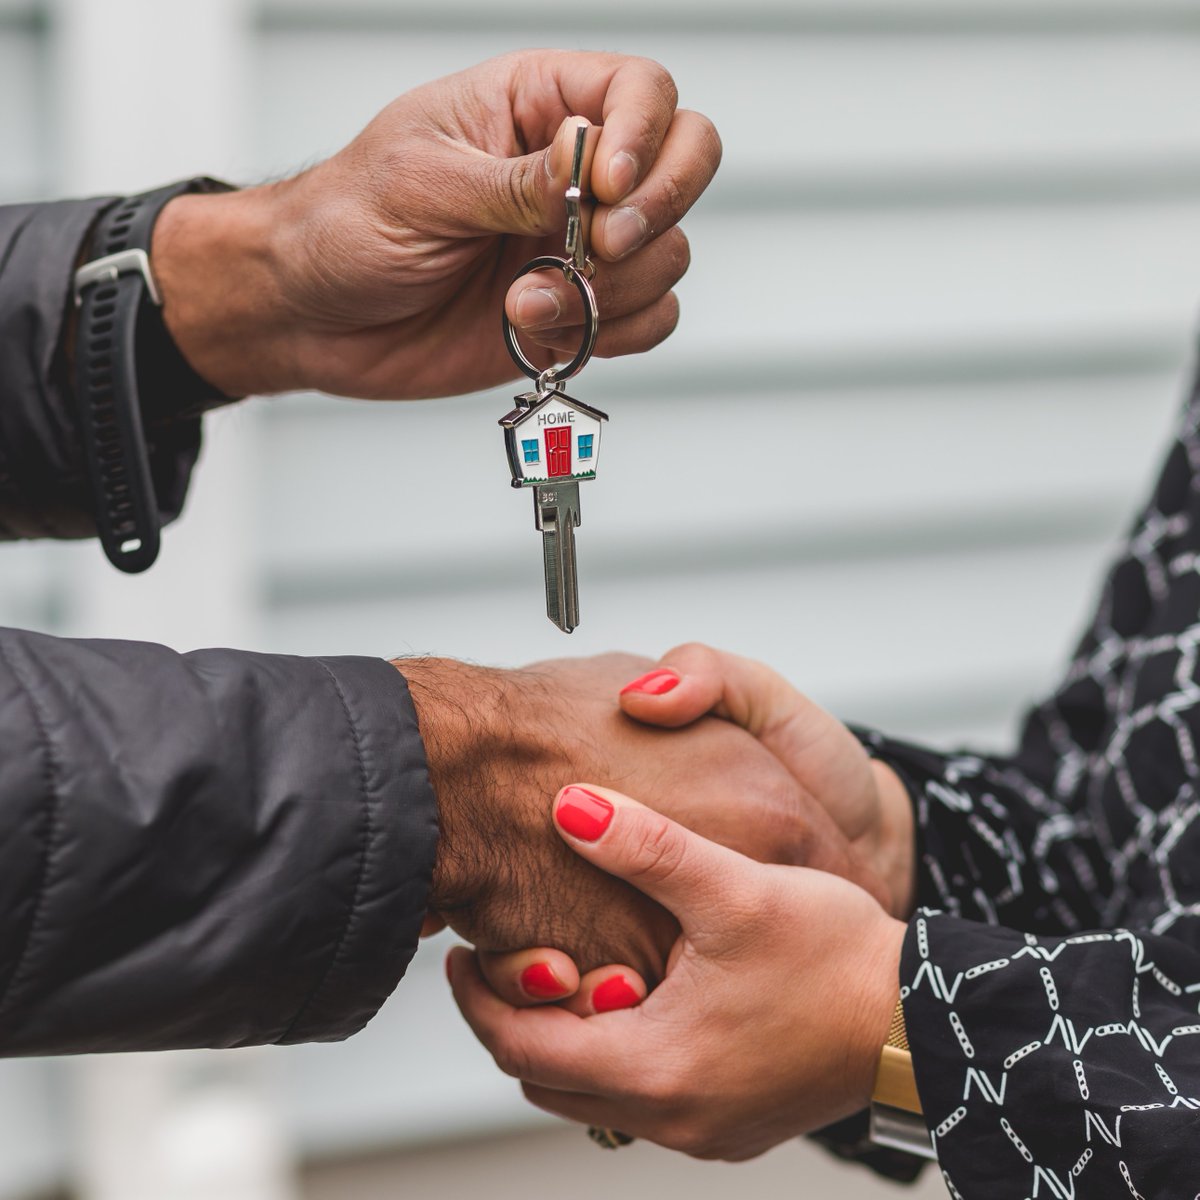 Looking for a new home can be a long and difficult process. That is why the team at Warwick Baker are here to help! ⭐

Find out more today! warwickbaker.co.uk

#ResidentialProperty #CommercialProperty #Buy #Rent #Flat #WarwickBaker #HousesToBuy #HouseToRent #Shoreham